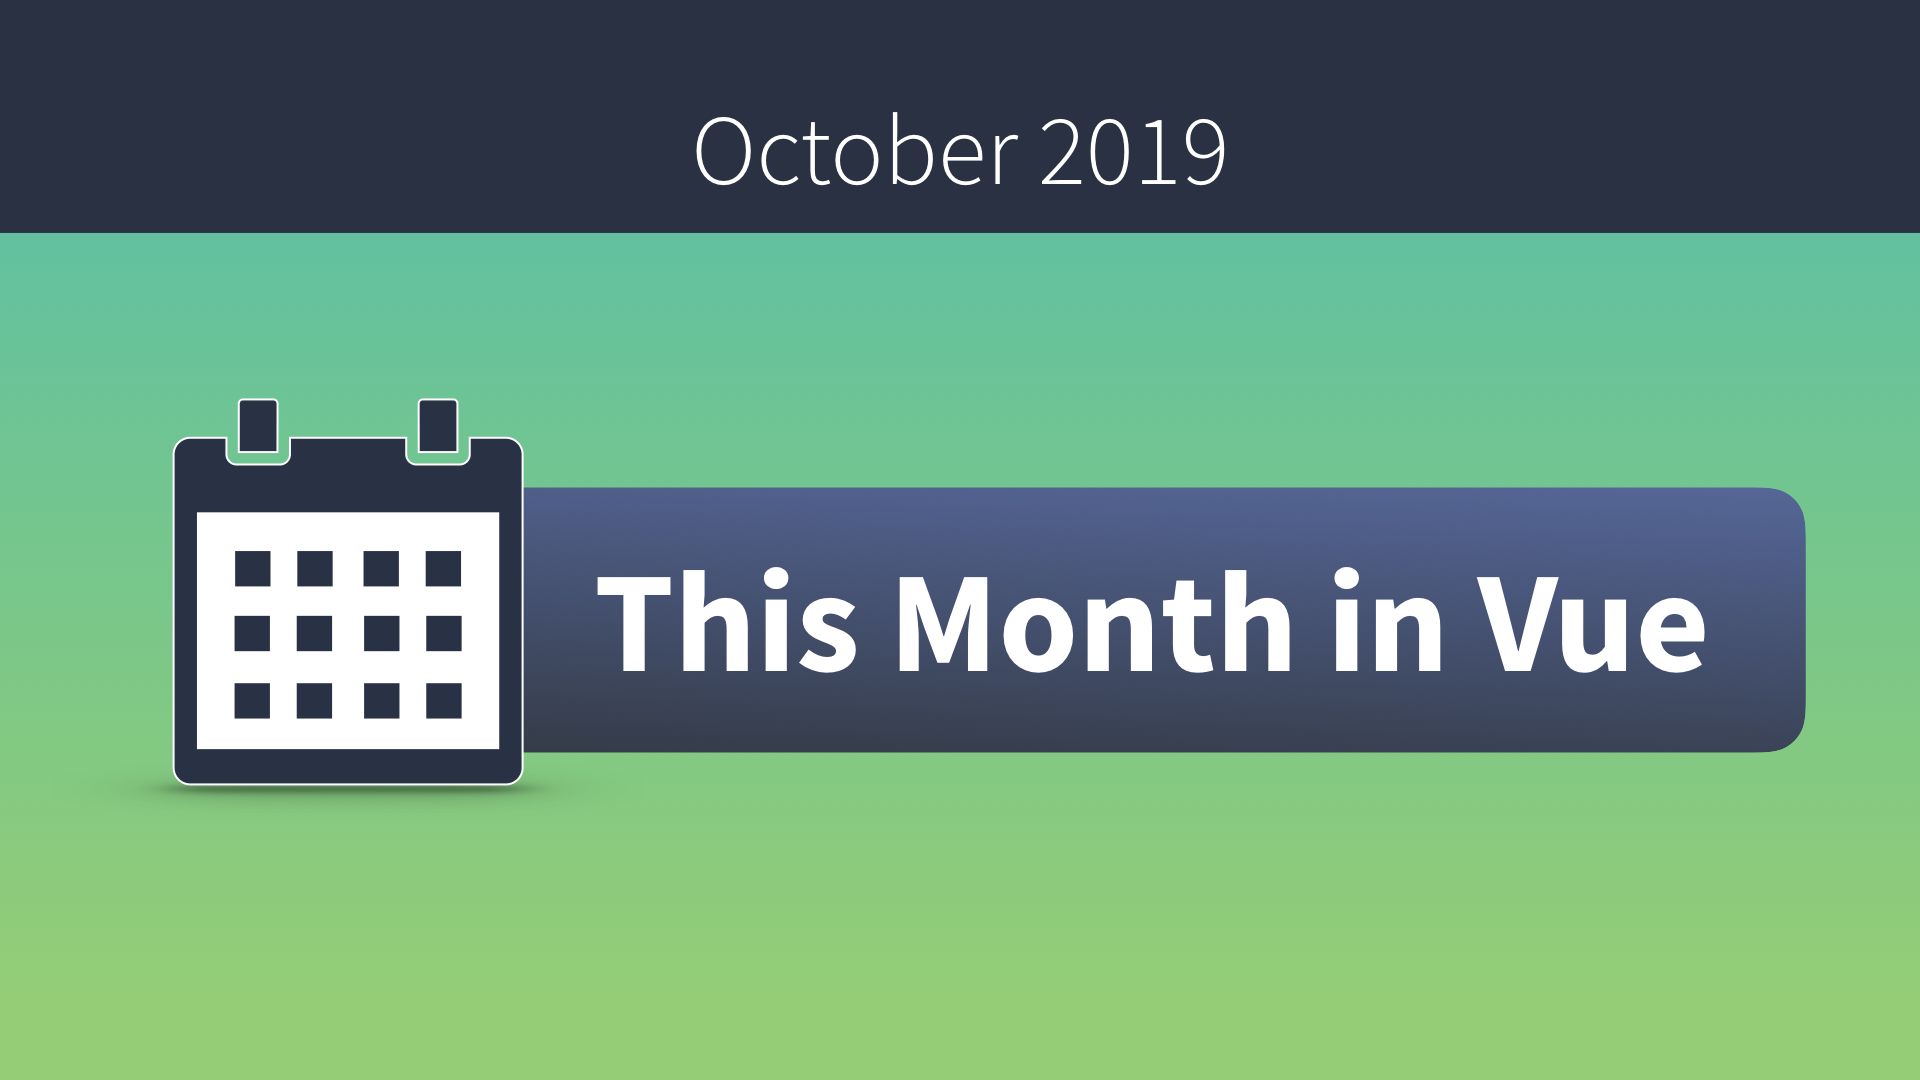 This Month in Vue - October 2019